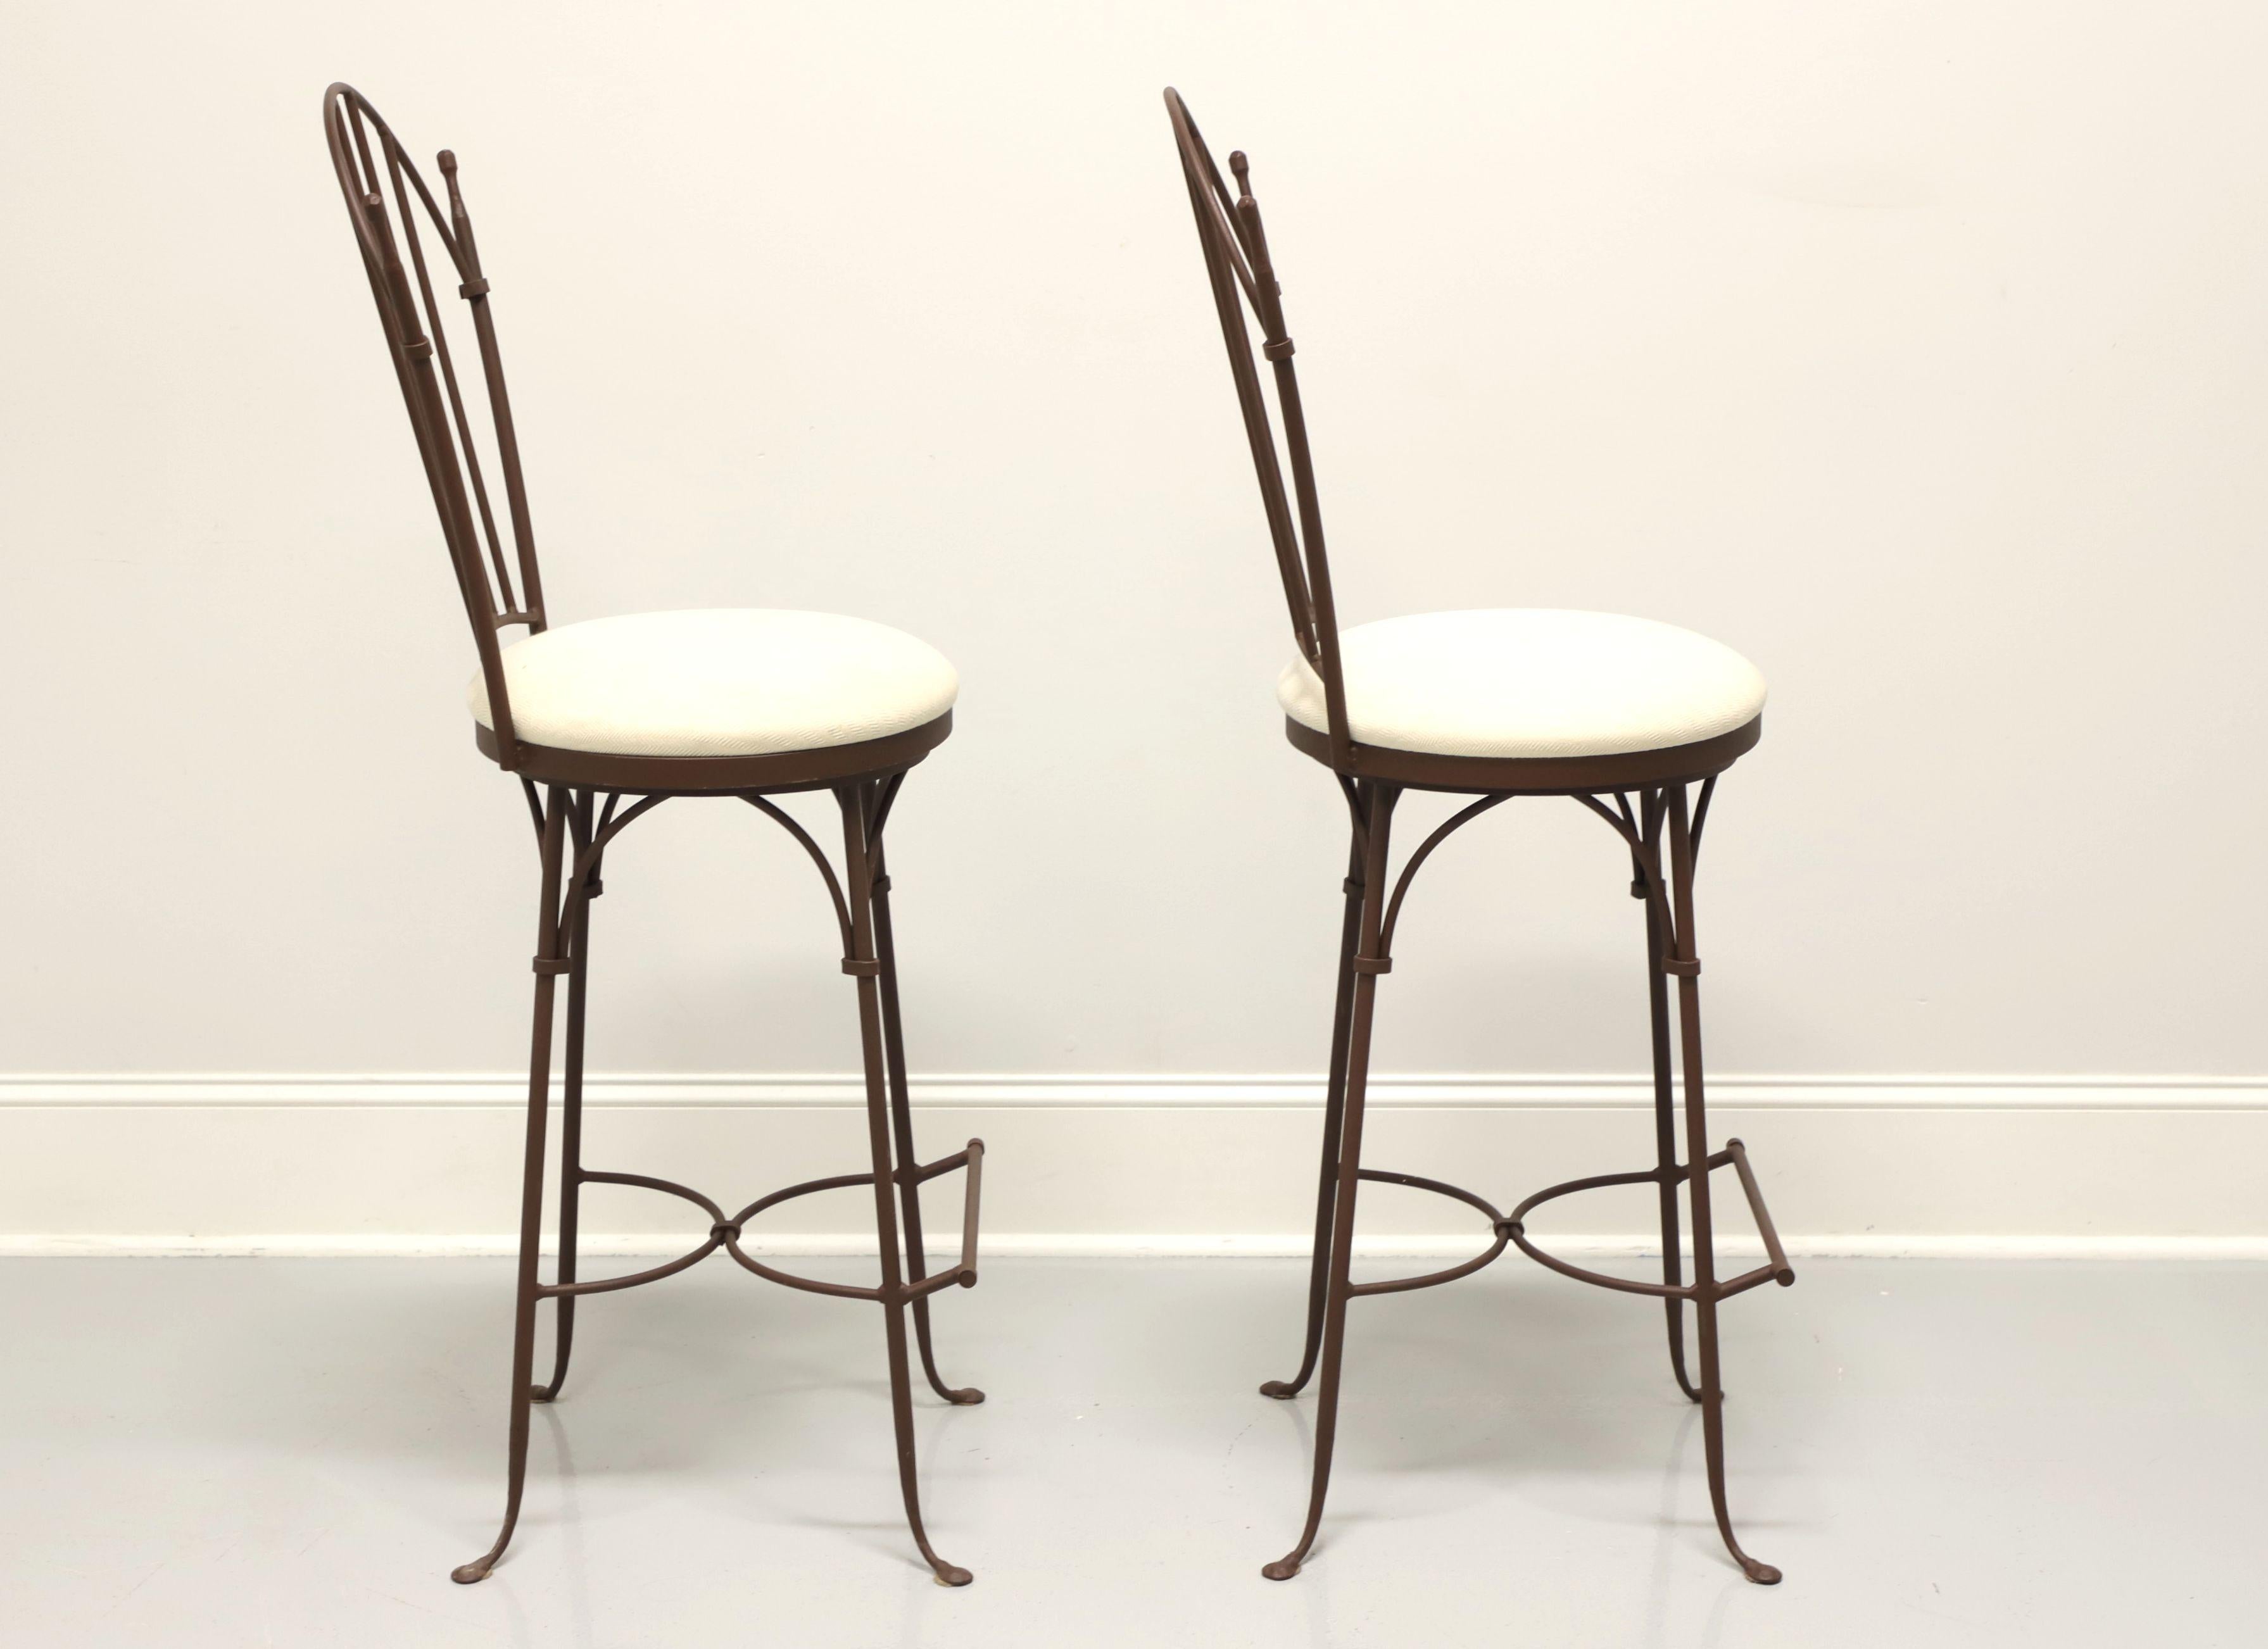 A pair of Contemporary style bar stools by Charleston Forge. Wrought iron with a Shaker arch back, cream colored fabric upholstered round seats that swivel, arced stretchers and bar foot rest. Made in Boone, North Carolina, USA, in the early 21st